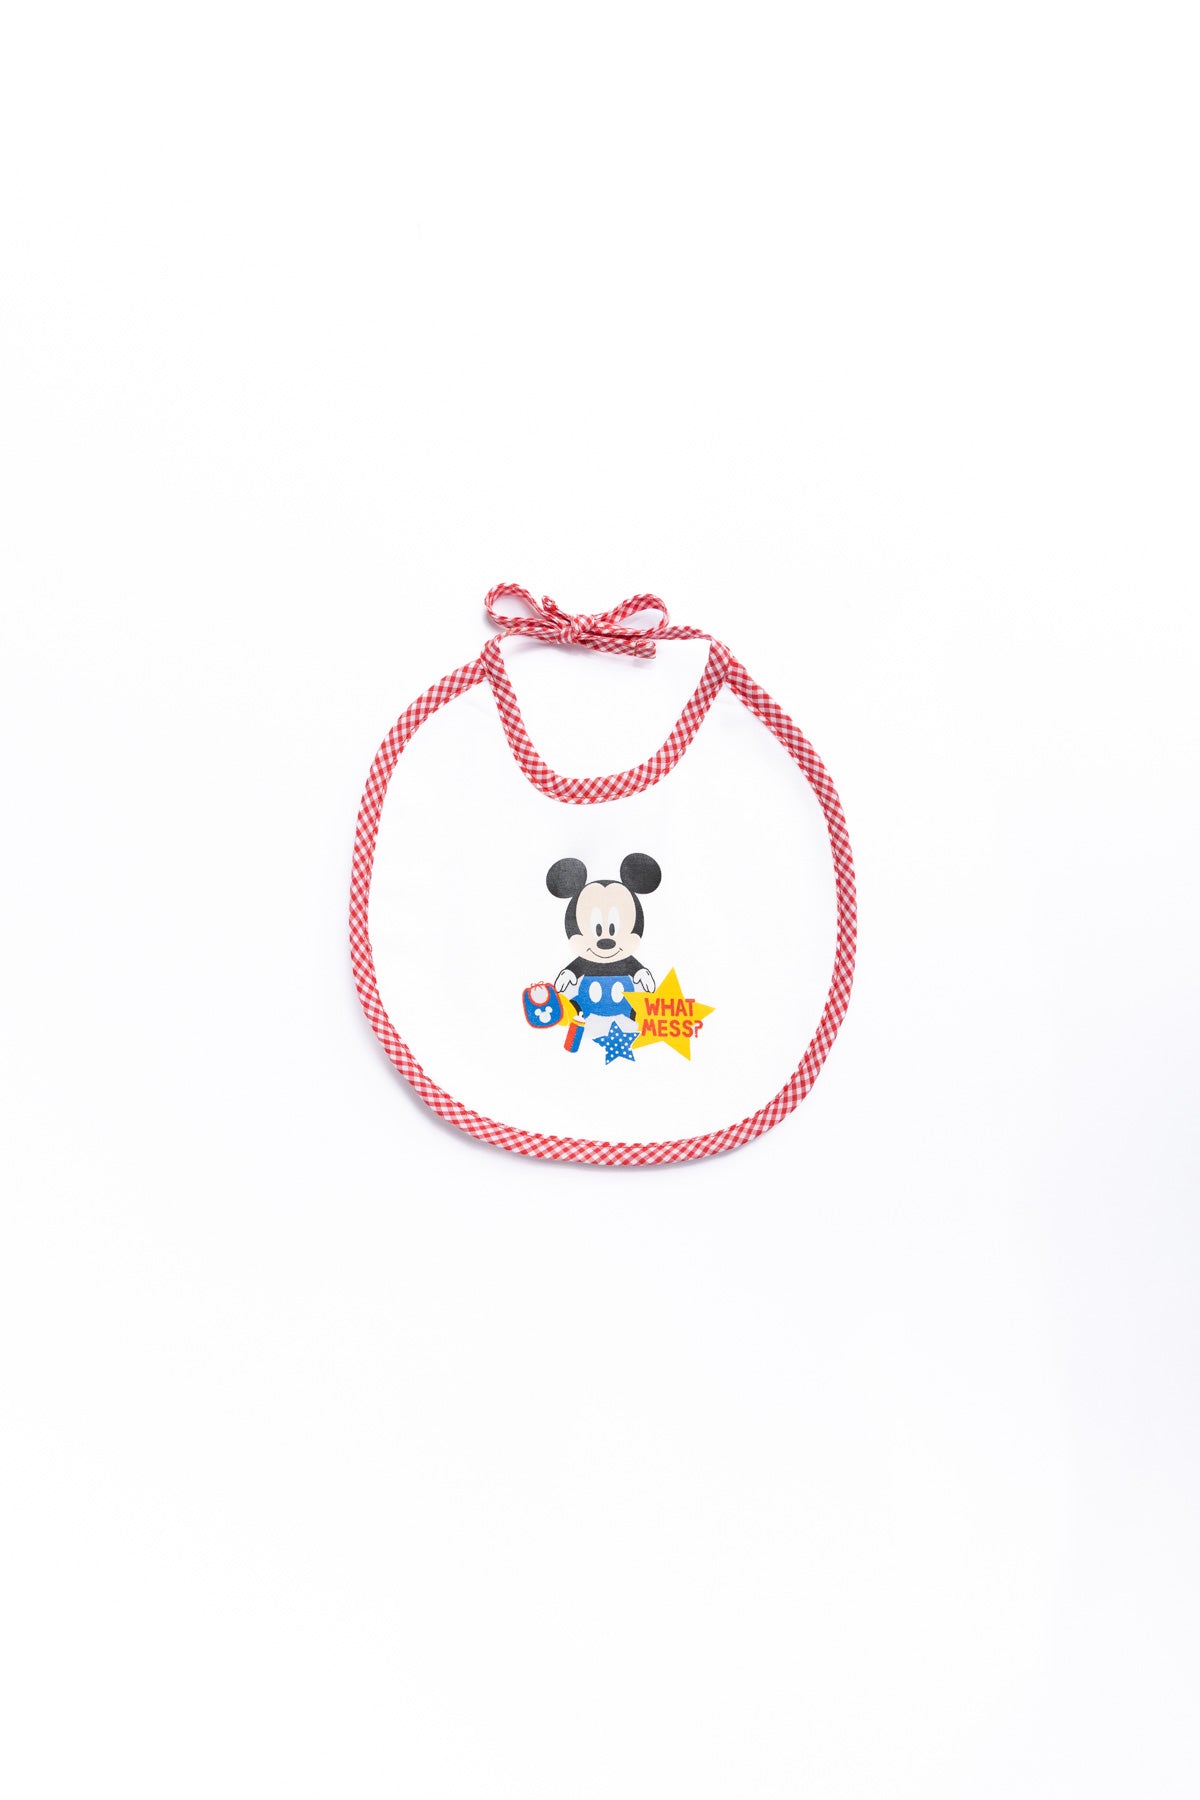 Baby Bib Disney/ Mickey Mouse "What Mess" Small 1113